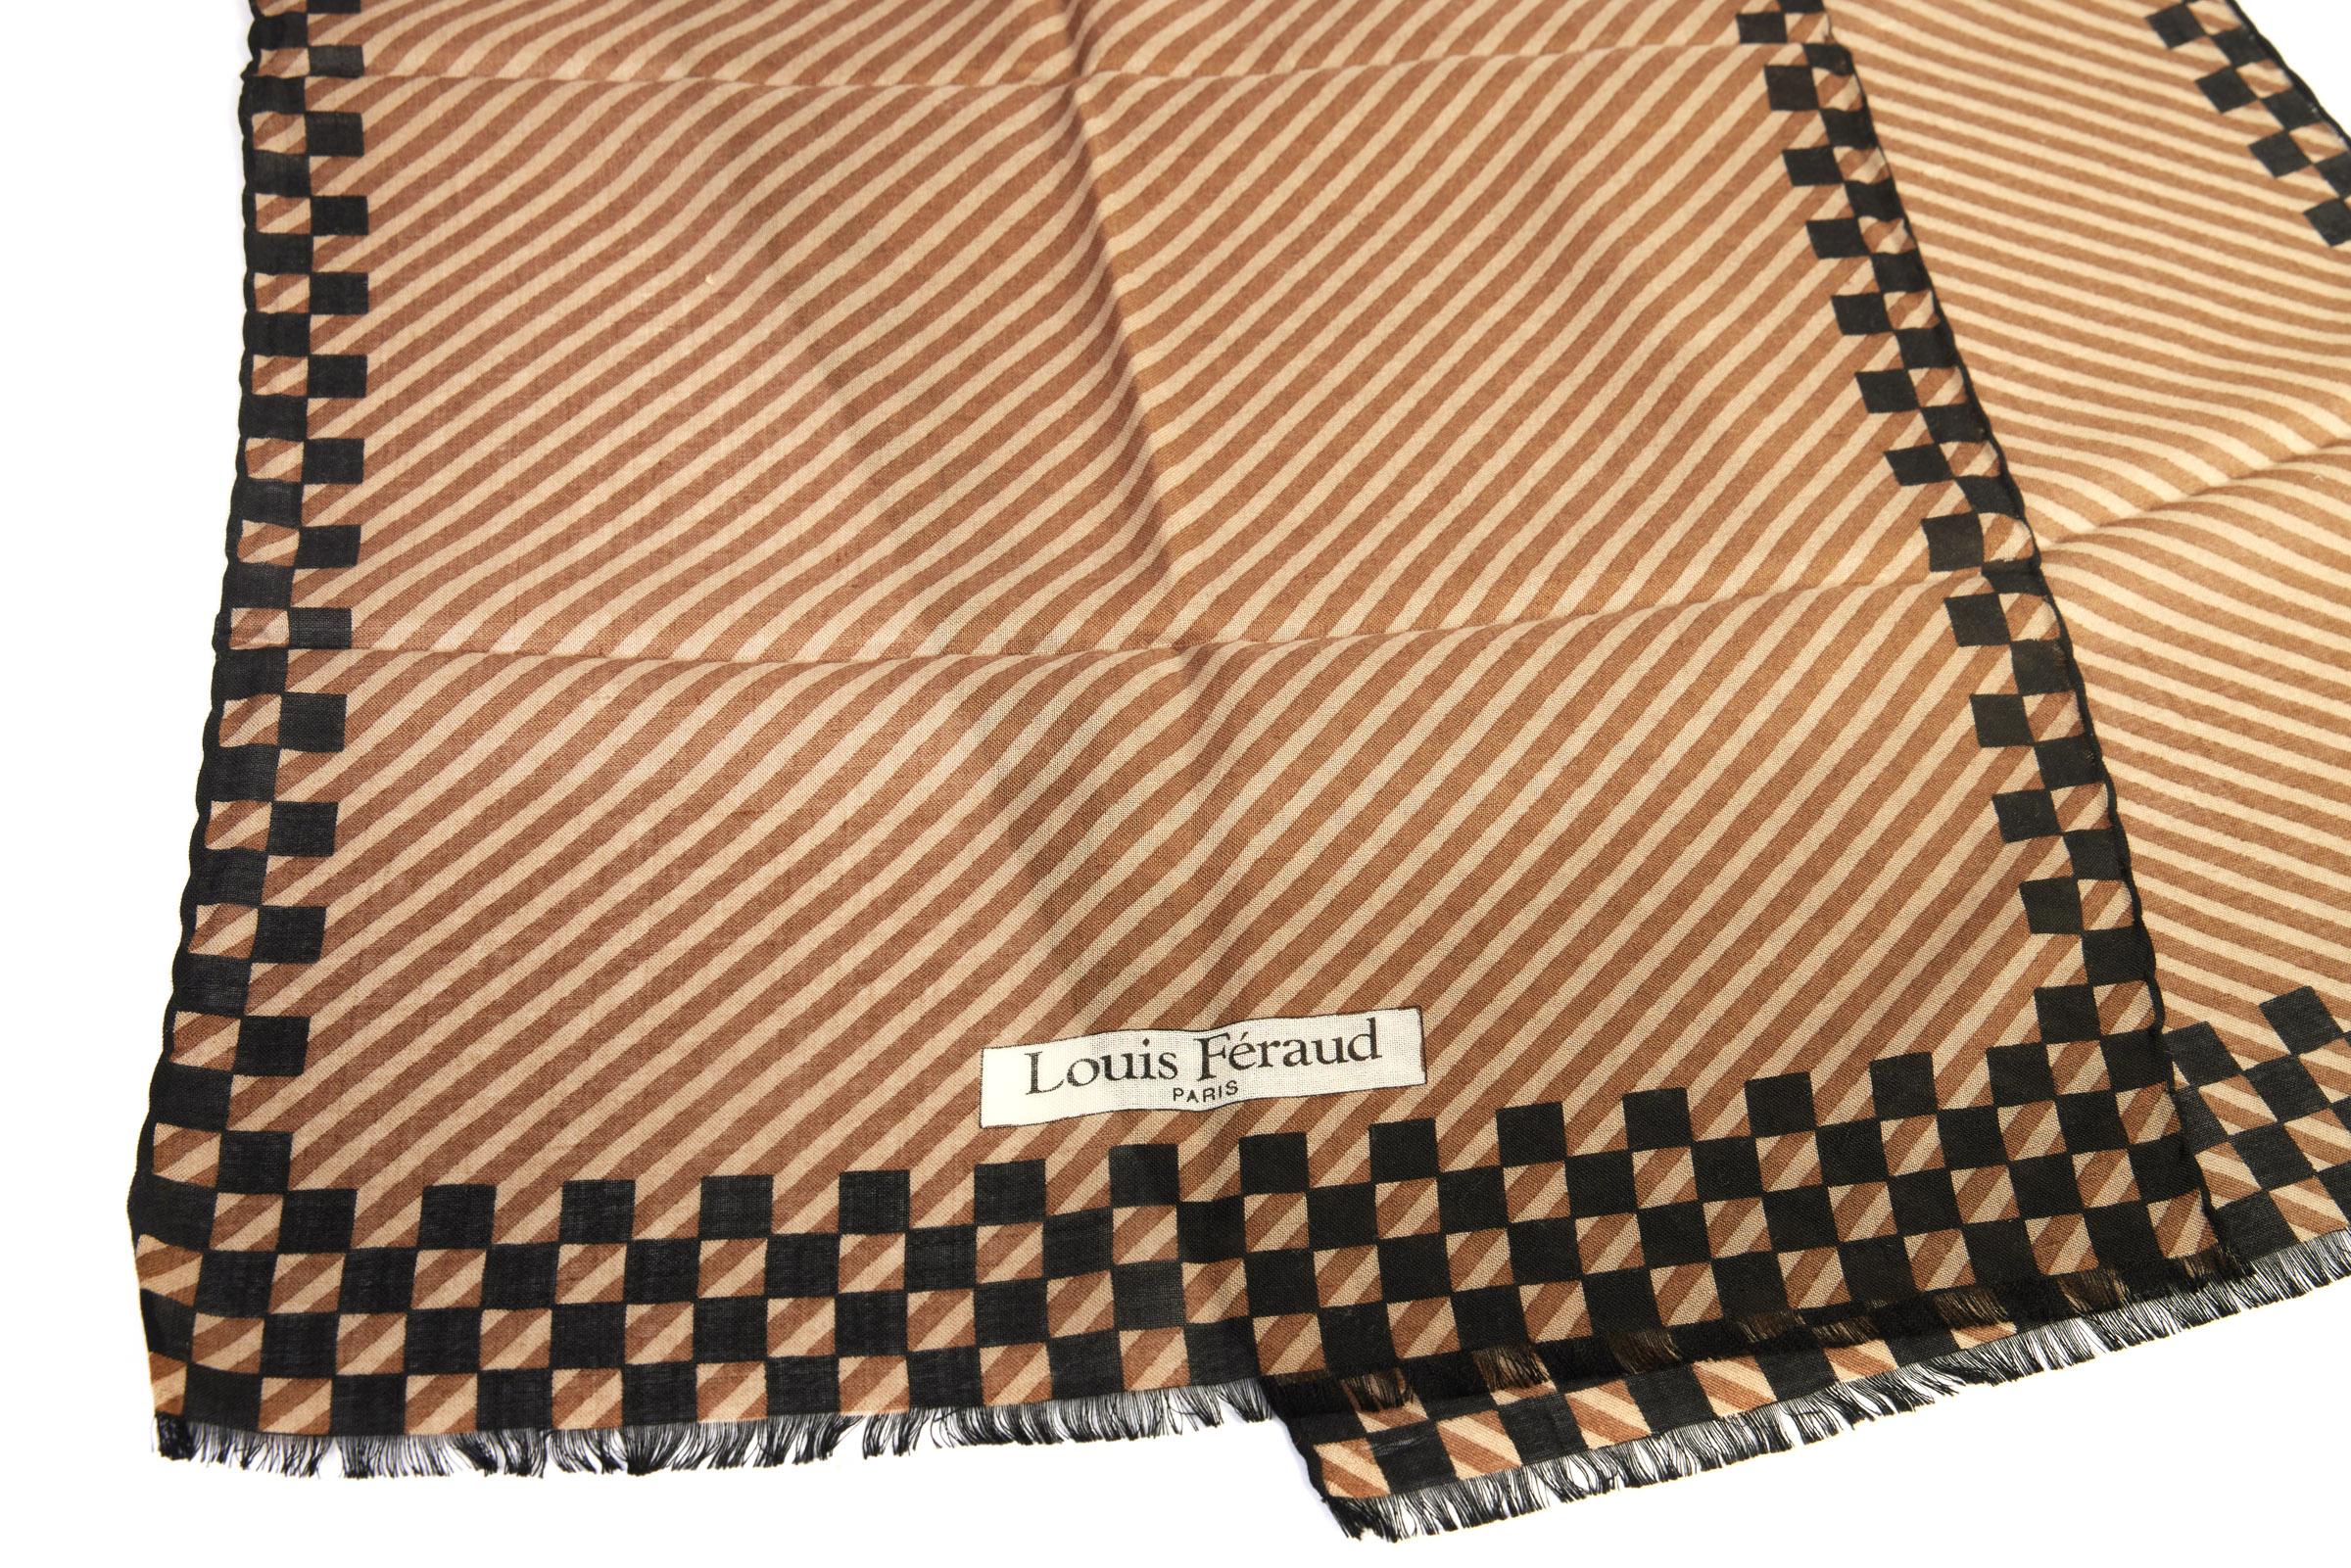 Louis Feraud Paris wool vintage scarf. Black and brown striped and checkers combo.